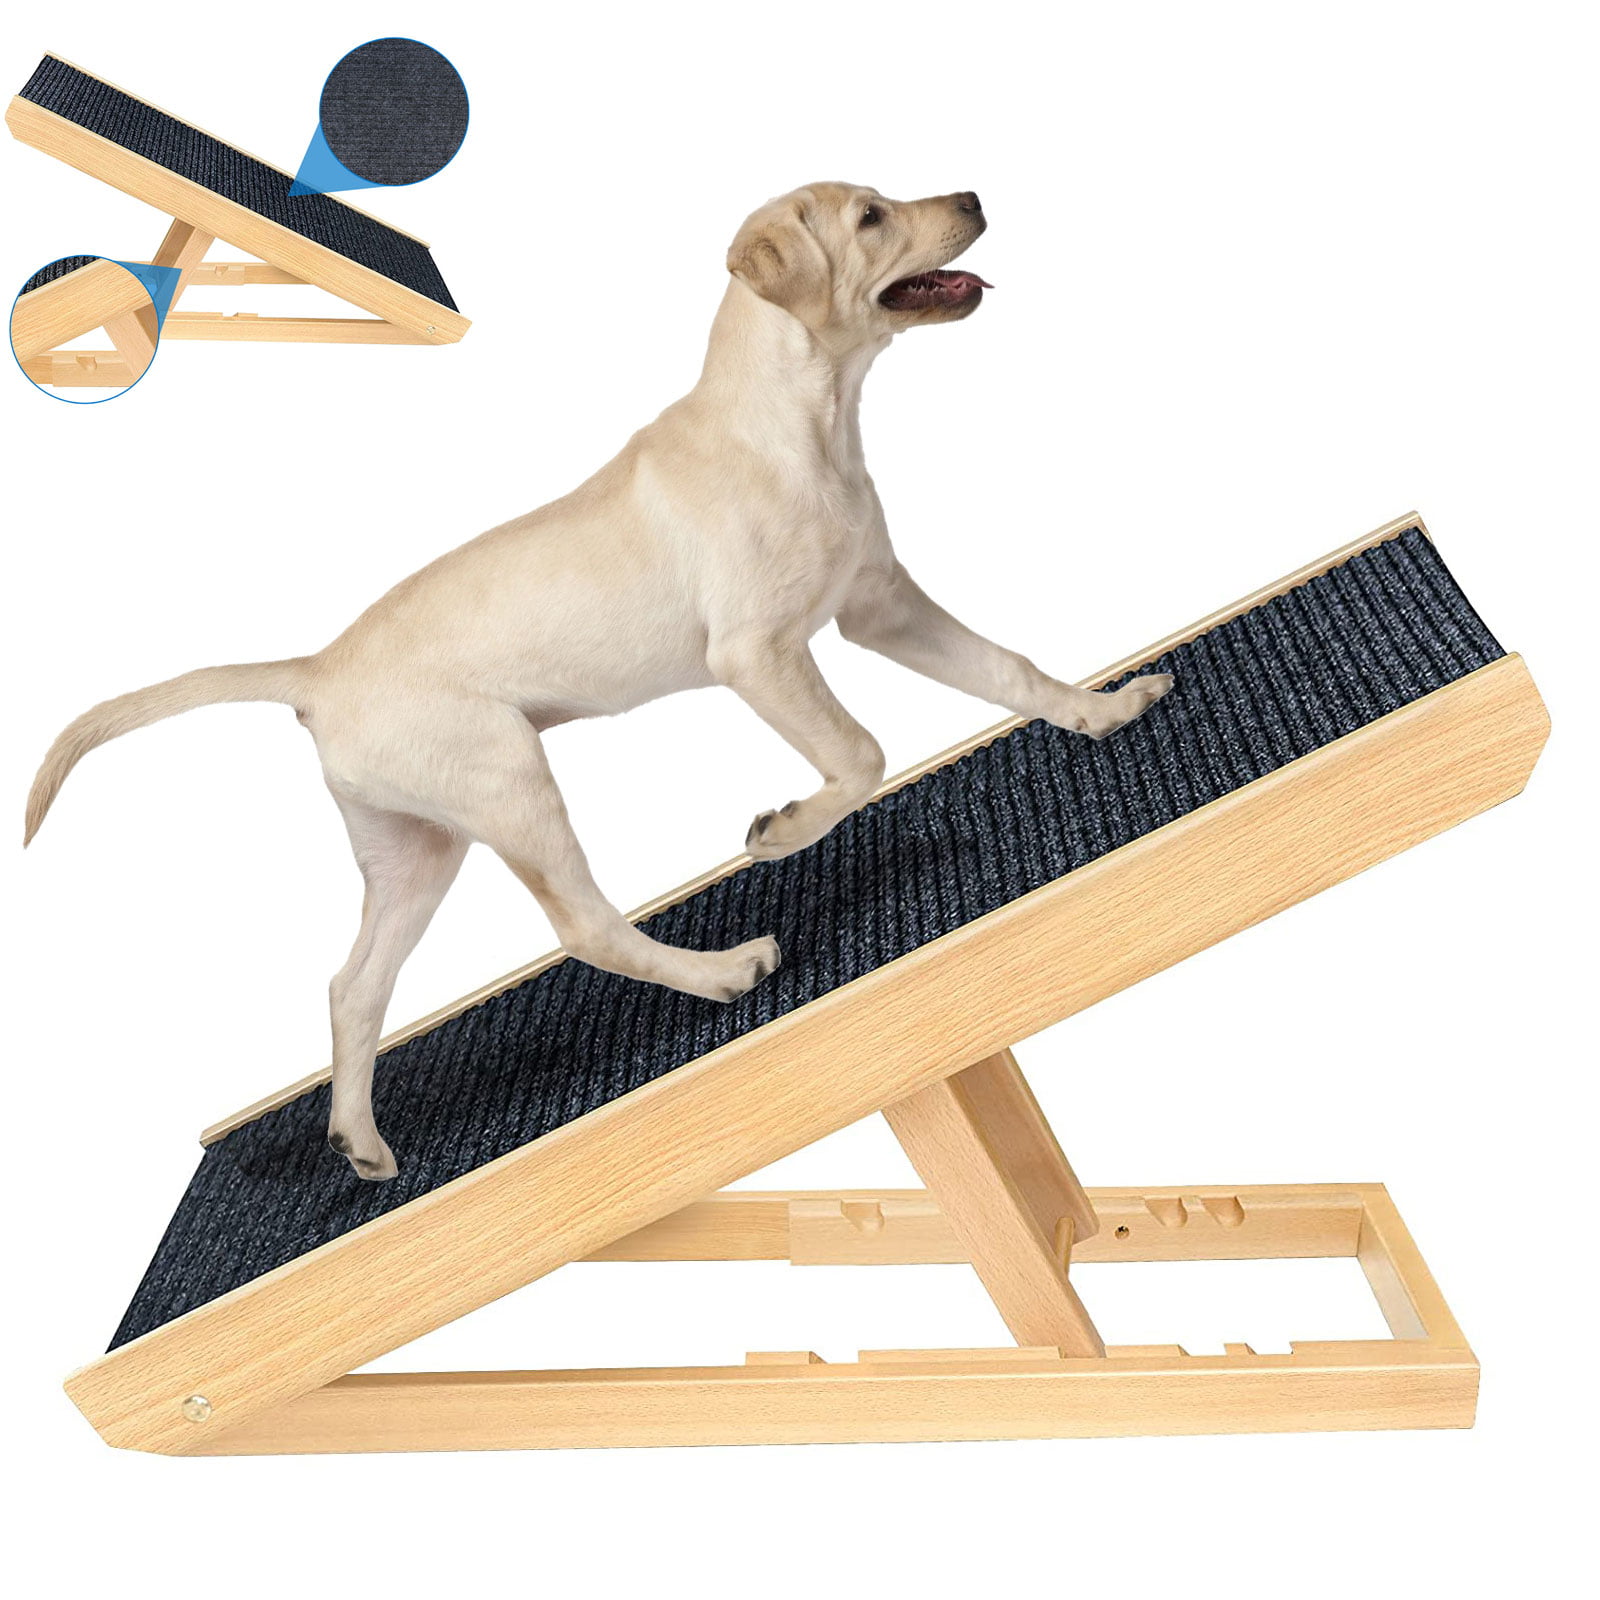 Height Adjustable from 12-24 Adjustable Pet Ramp for Dogs and Cats Folding Ramp for Pets with Paw Traction Mat Holds up to 80 lbs White AlphaPaw PawRamp Full 40 x 16 Surface 